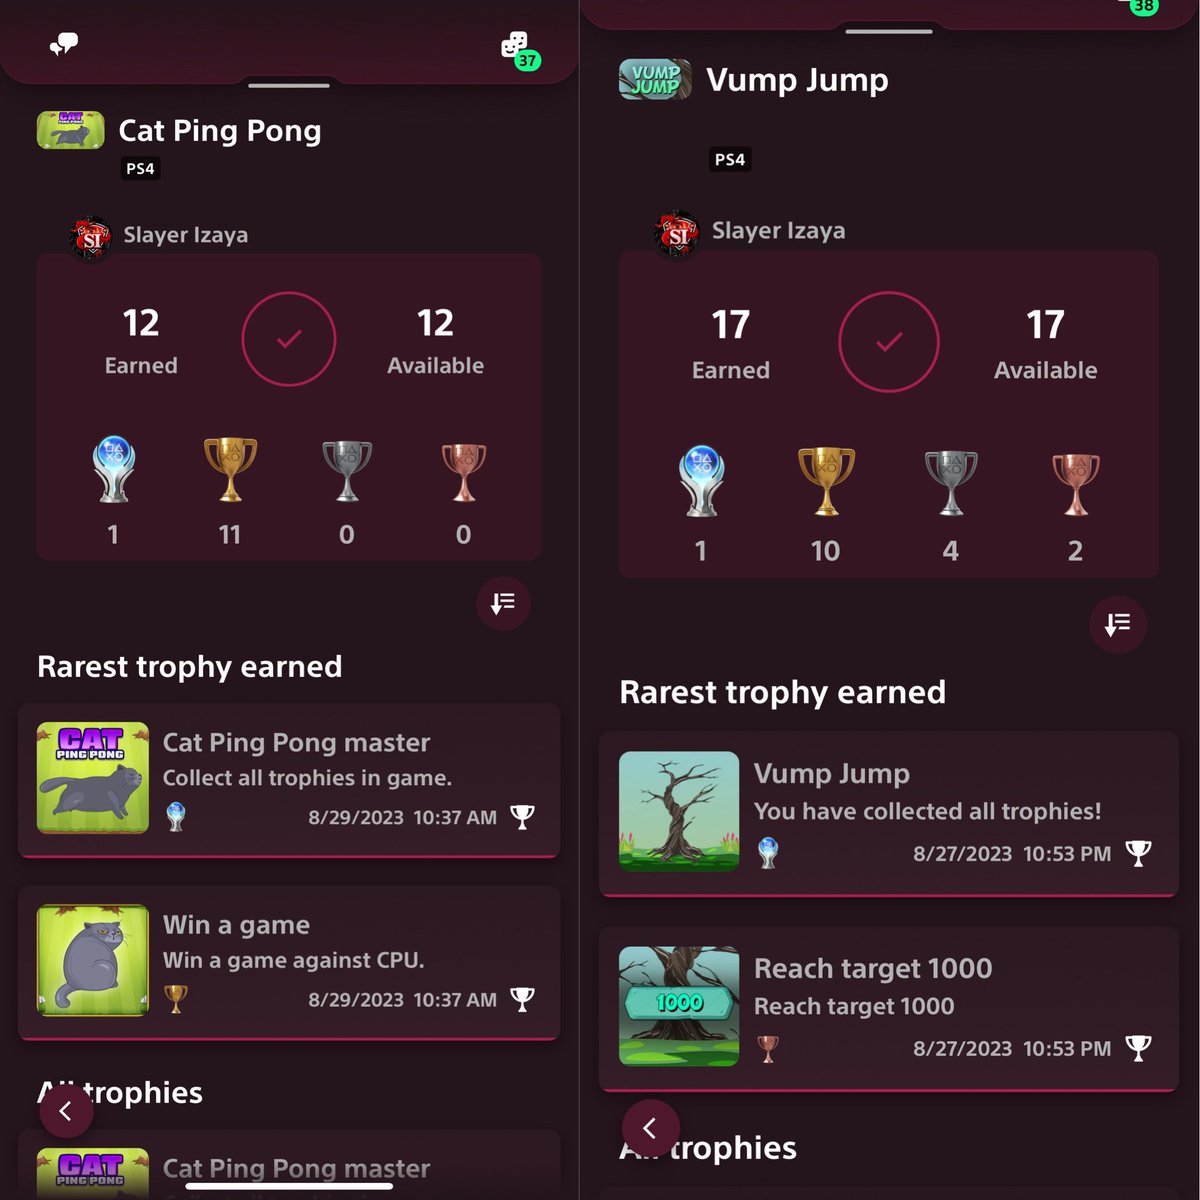 2 easy platinums! #catpingpong and #vumpjump yay!